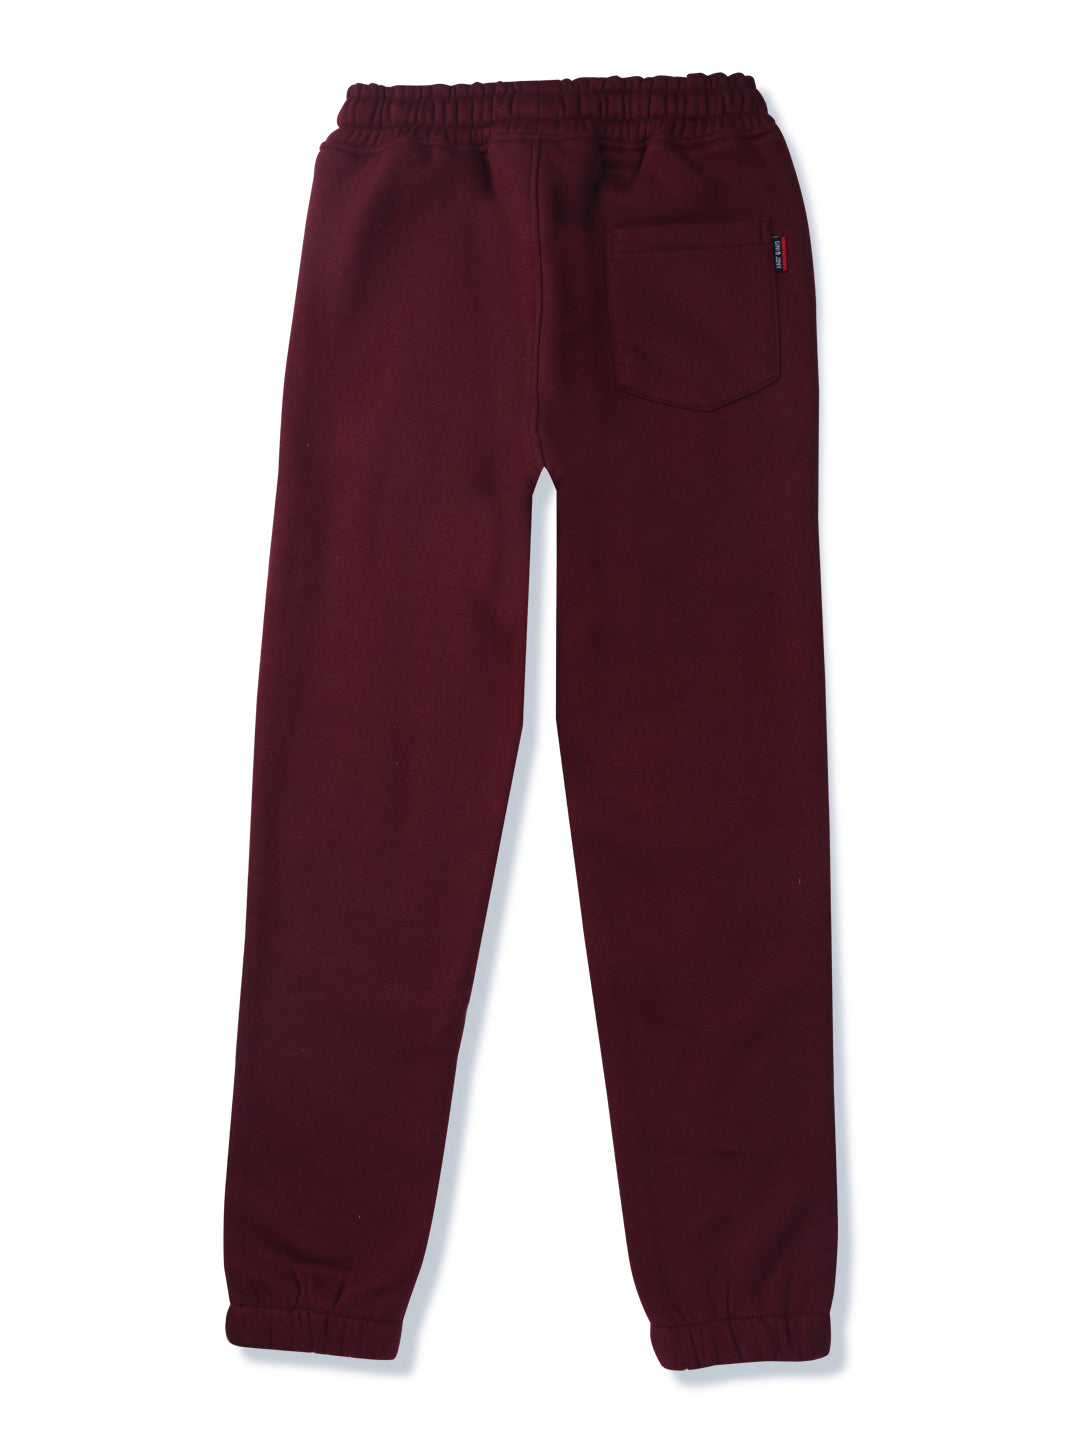 Boys Maroon Solid Cotton Track Pant